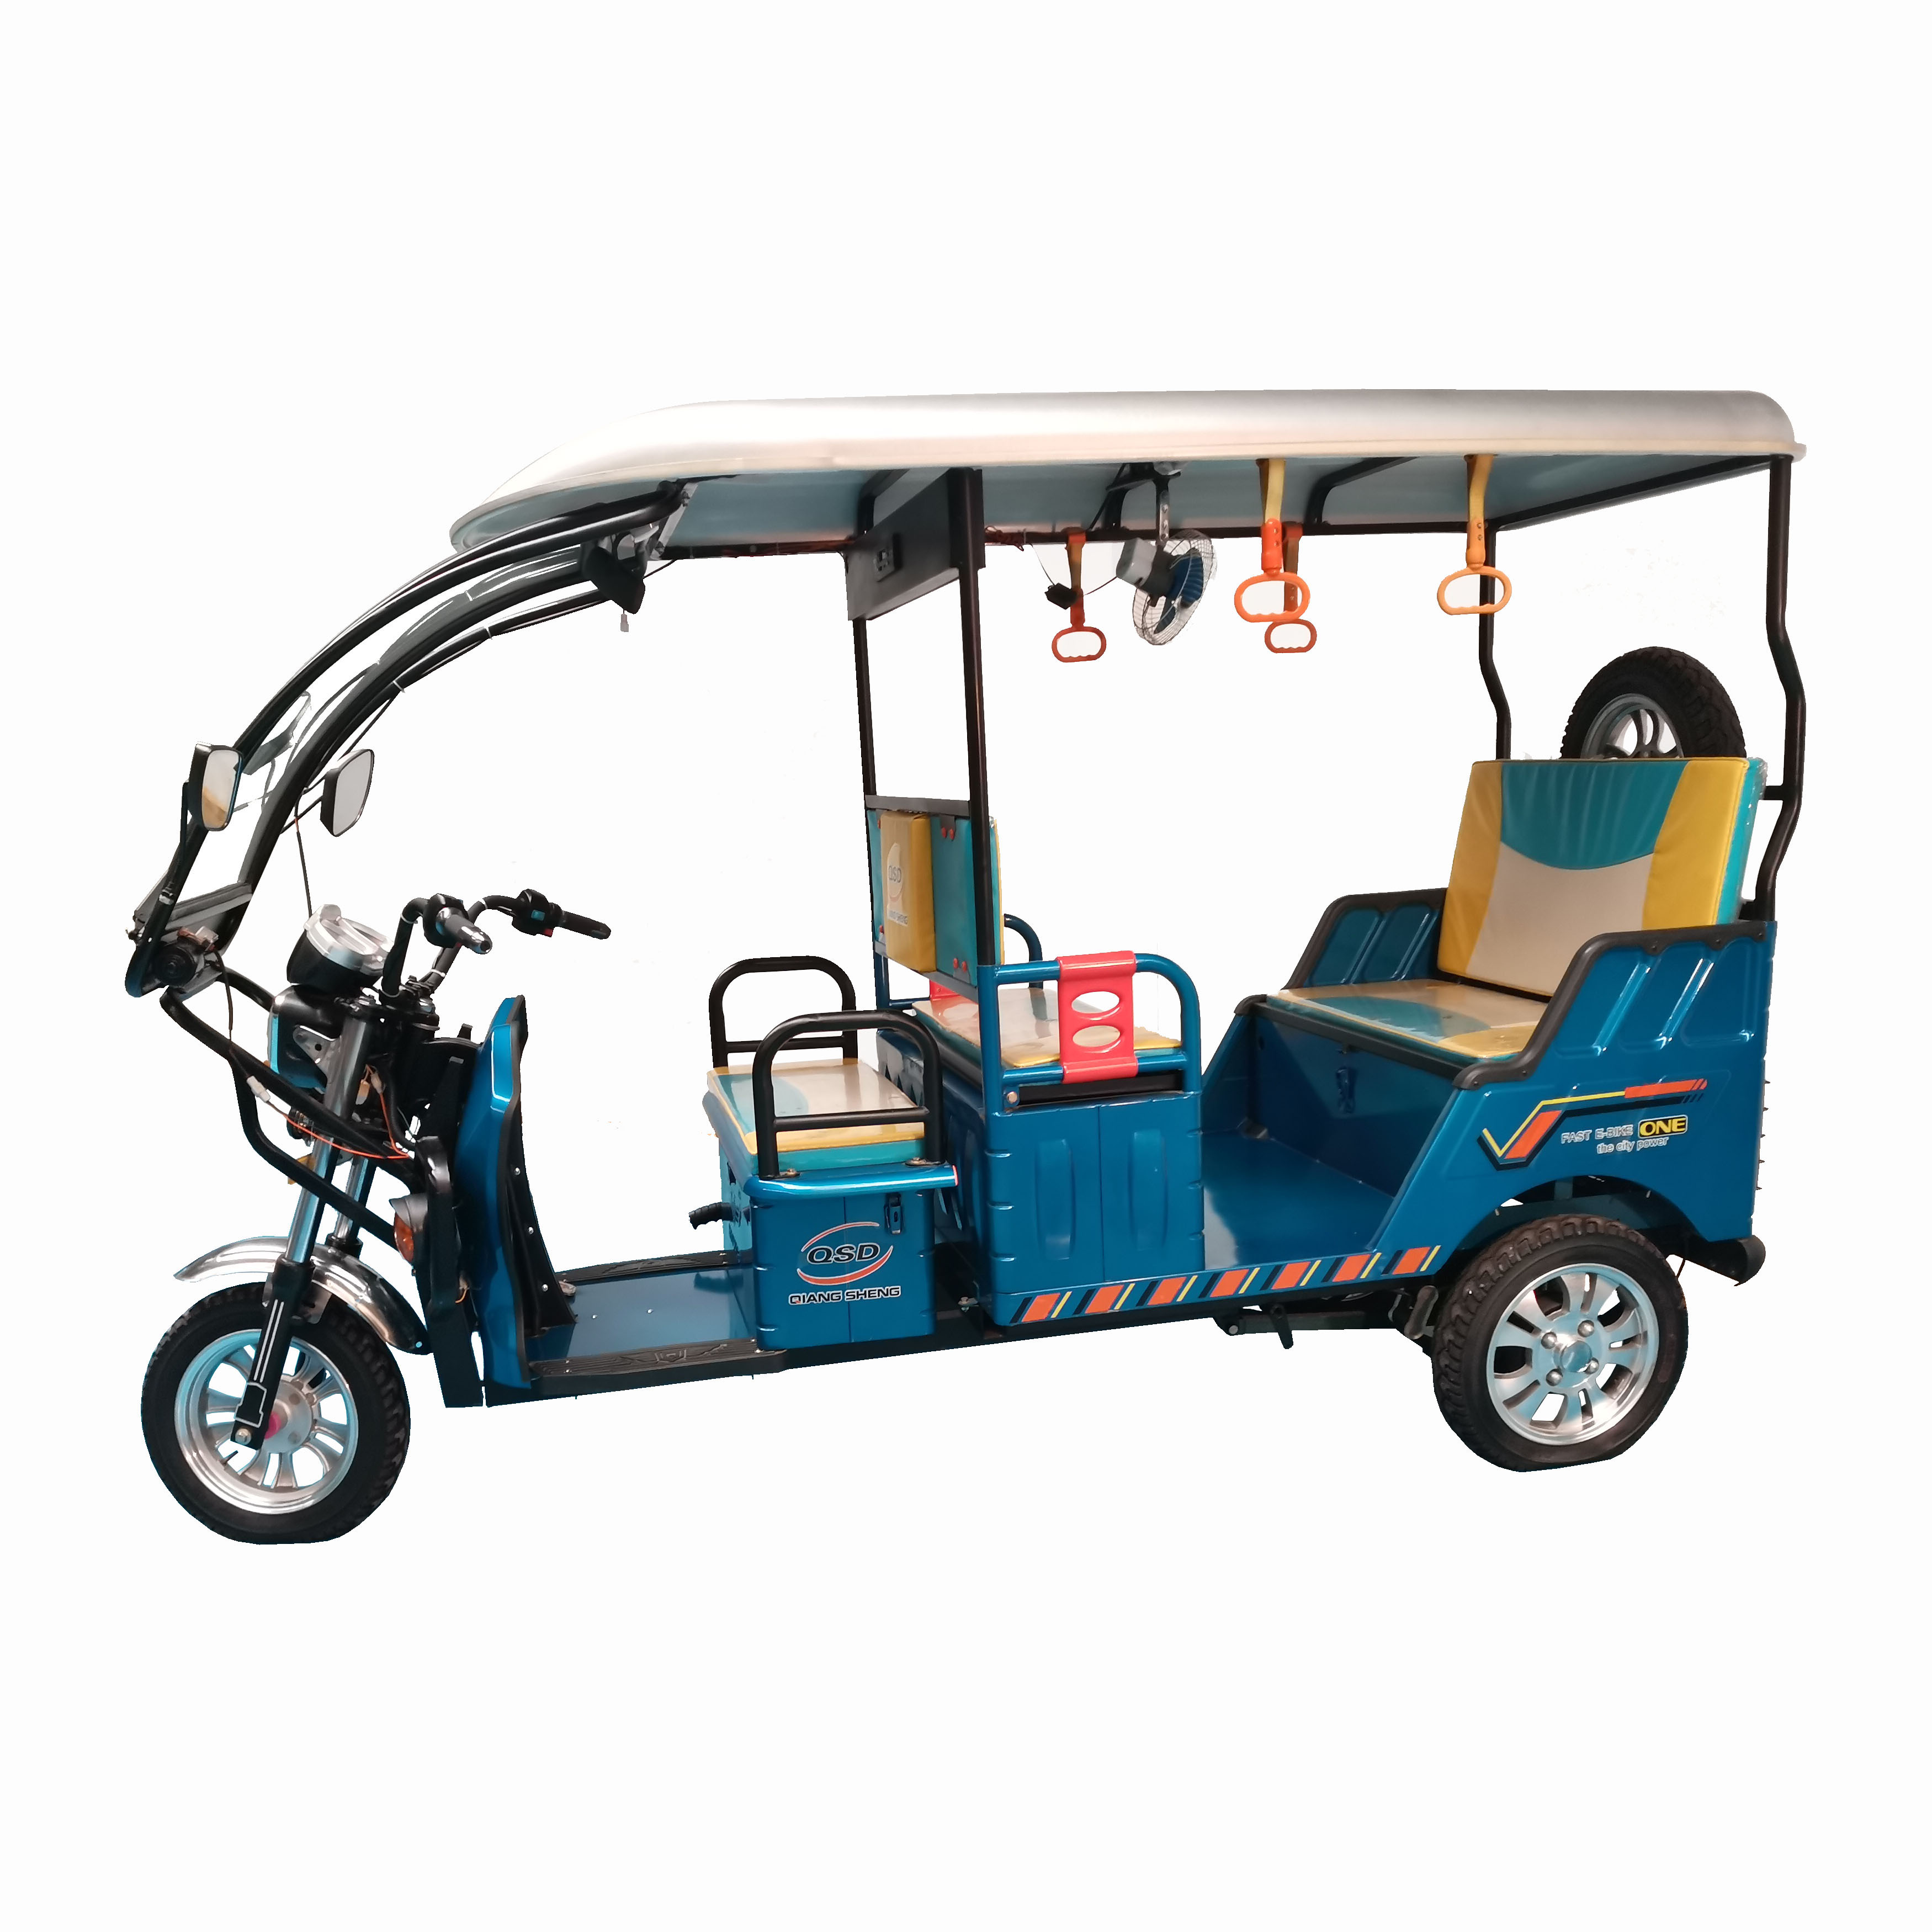 China Wholesale Tuk Tuk Electr Quotes - 48v 900w Motor 40km/h Speed Battery Operated Electric Rickshaw 4 Passenger Models Three Wheel Electric Tricycle – Qiangsheng